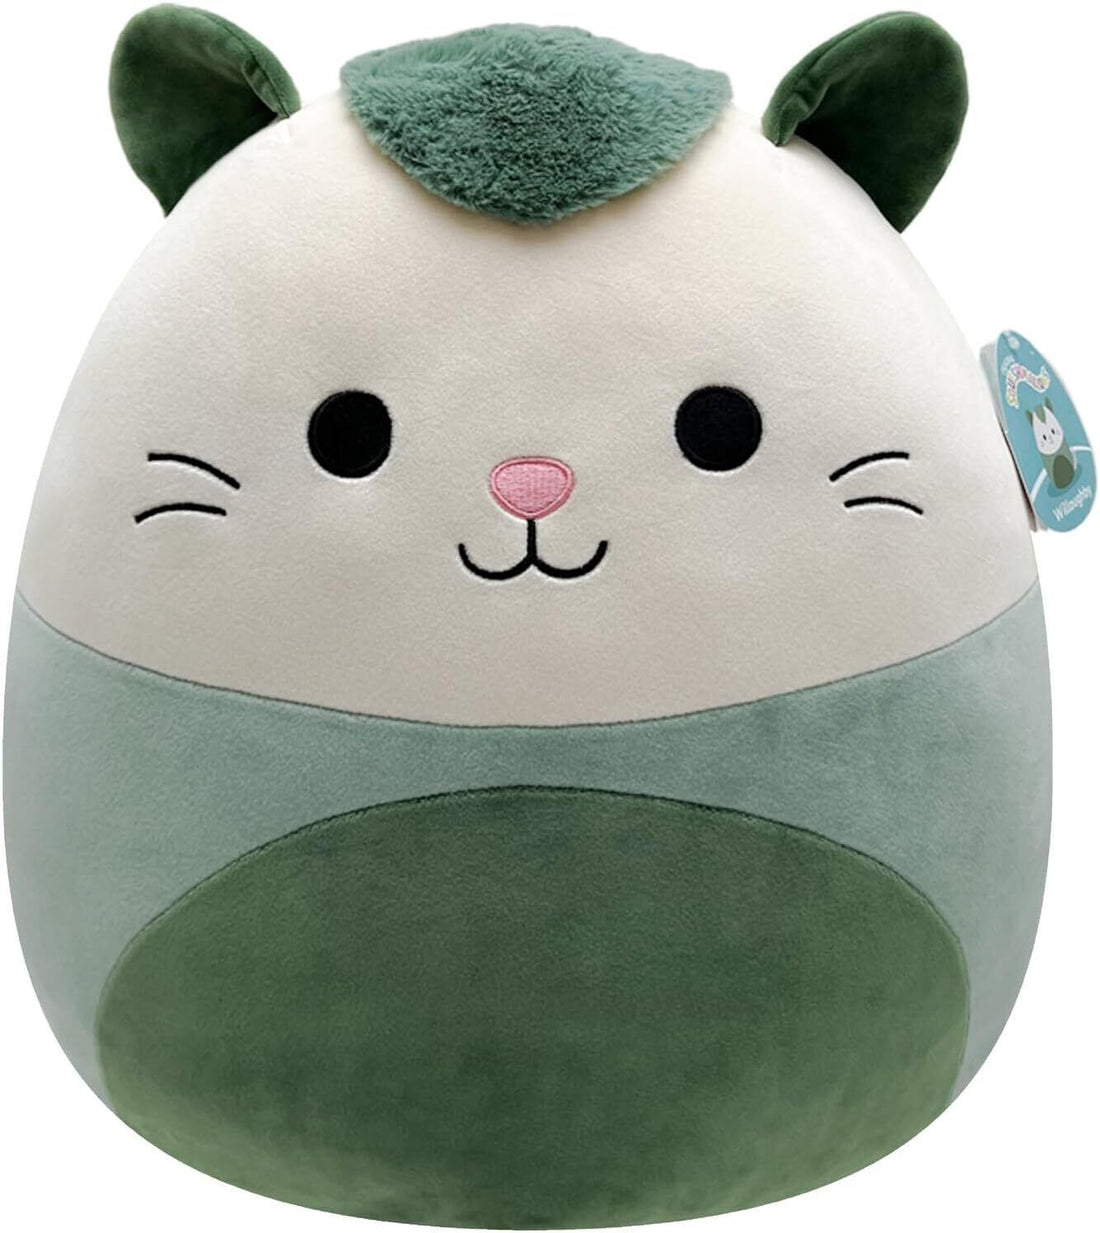 16-Inch Squishmallow Plush Toys - Various Characters-Super Soft and Collectible - WILLOUGHBY GREEN POSSUM